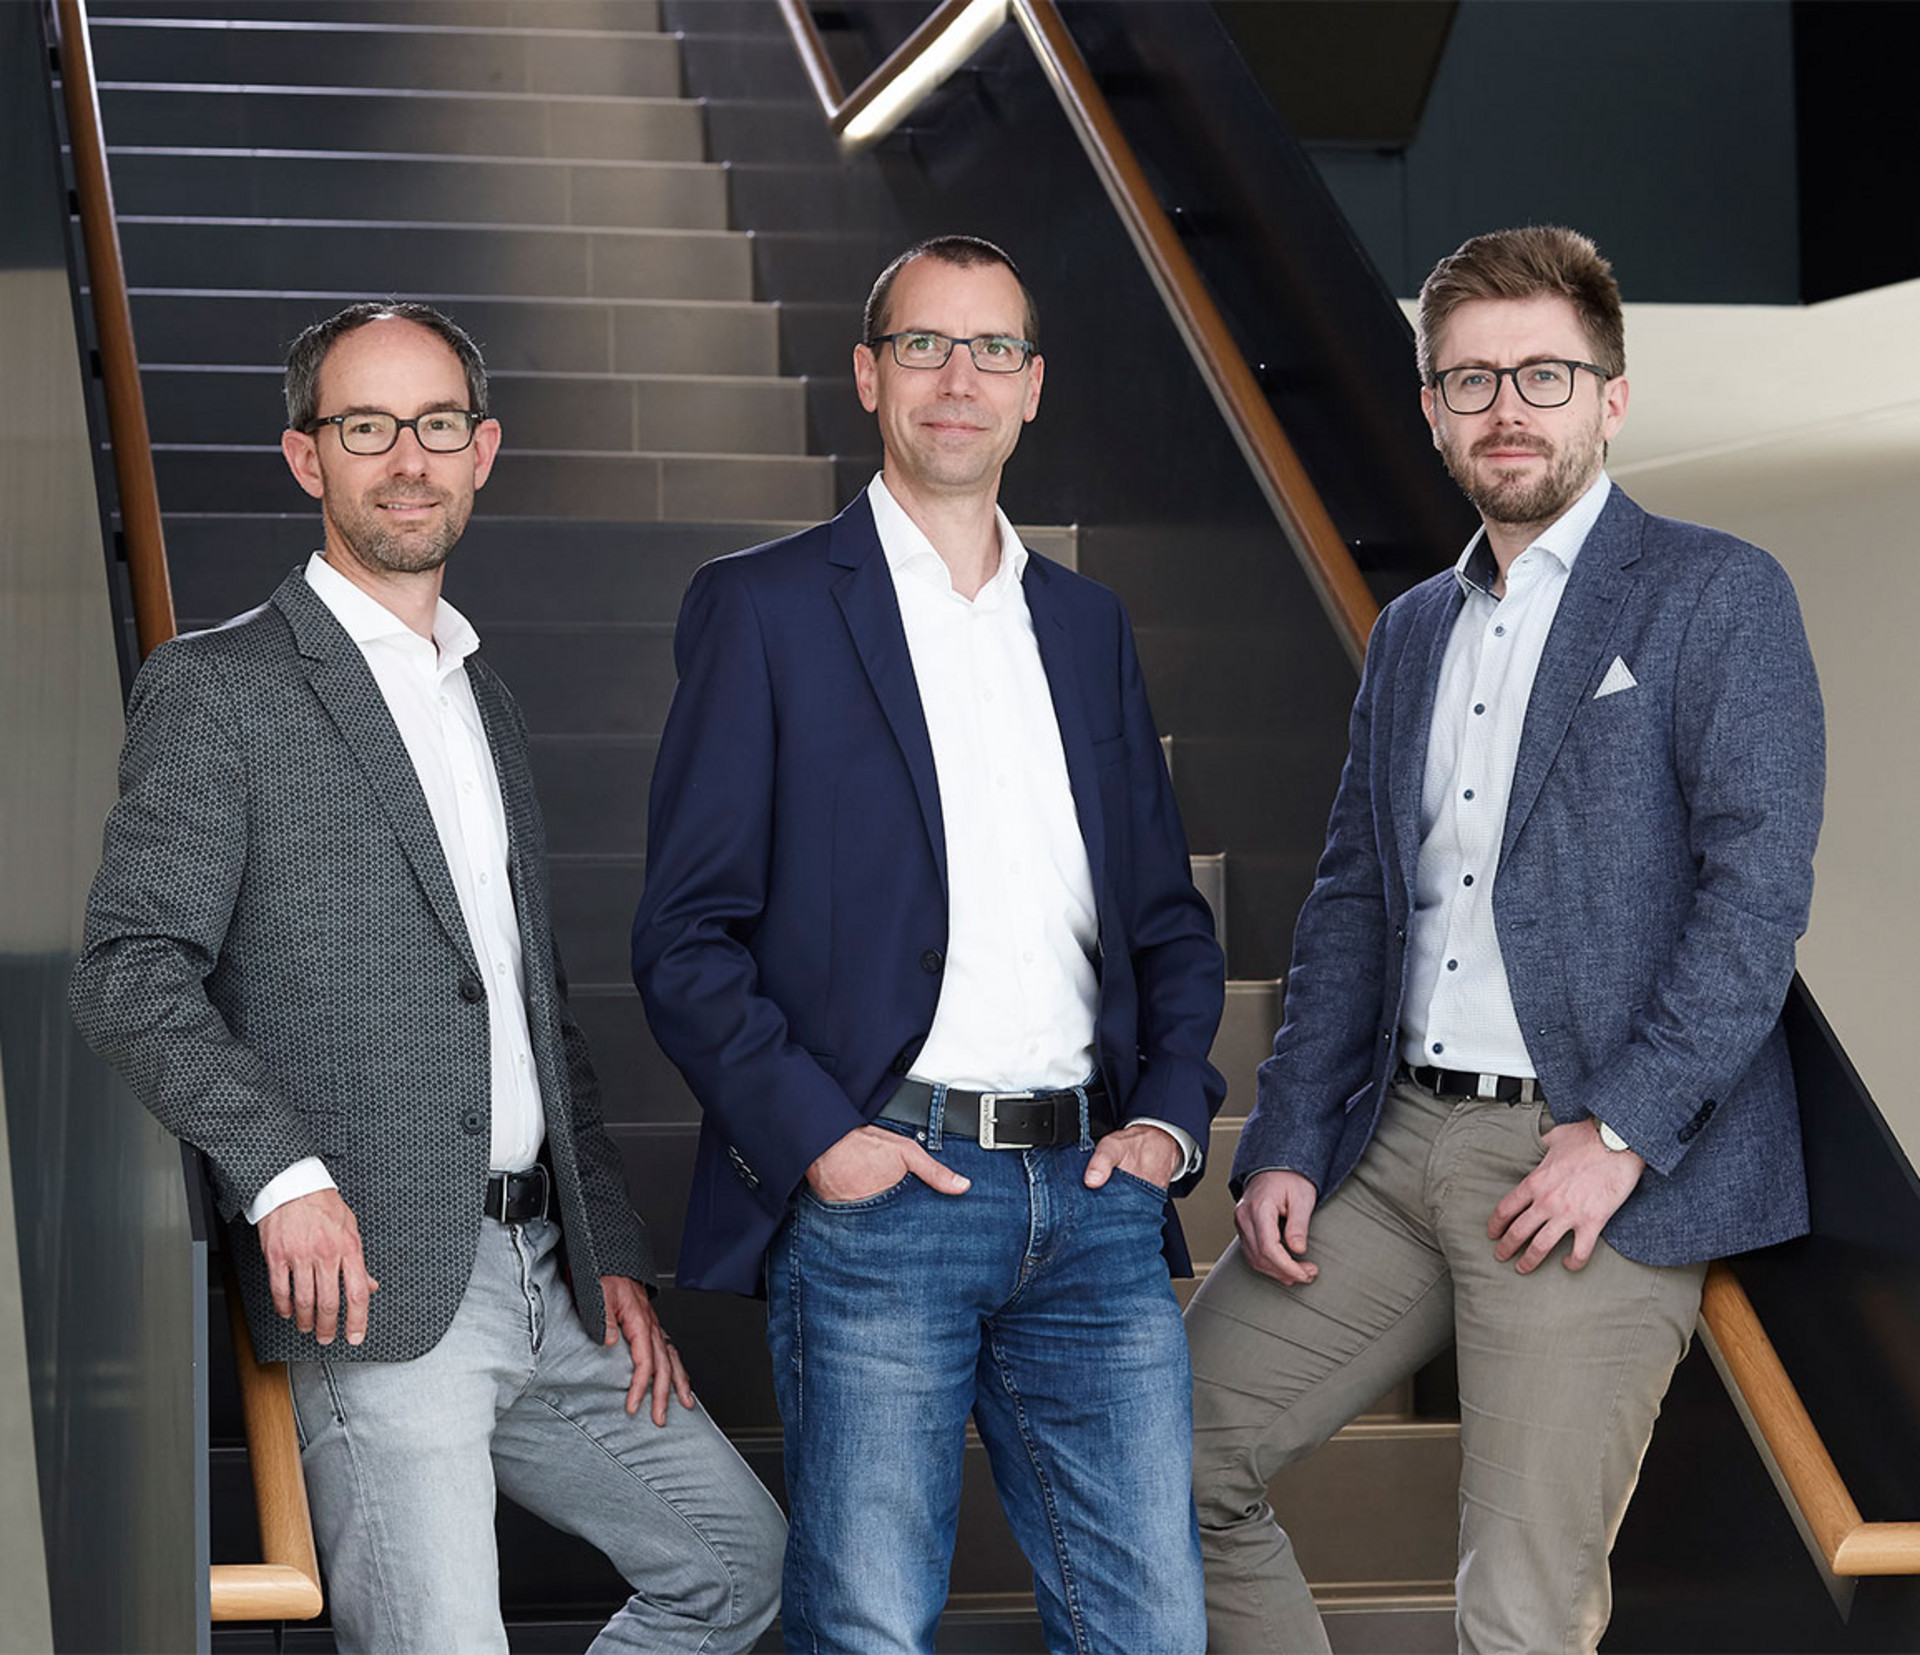 Our Nanoscribe management consisting of, from left to right, CEO Martin Hermatschweiler, CFO Lars Tritschler, and CSO Dr. Michael Thiel